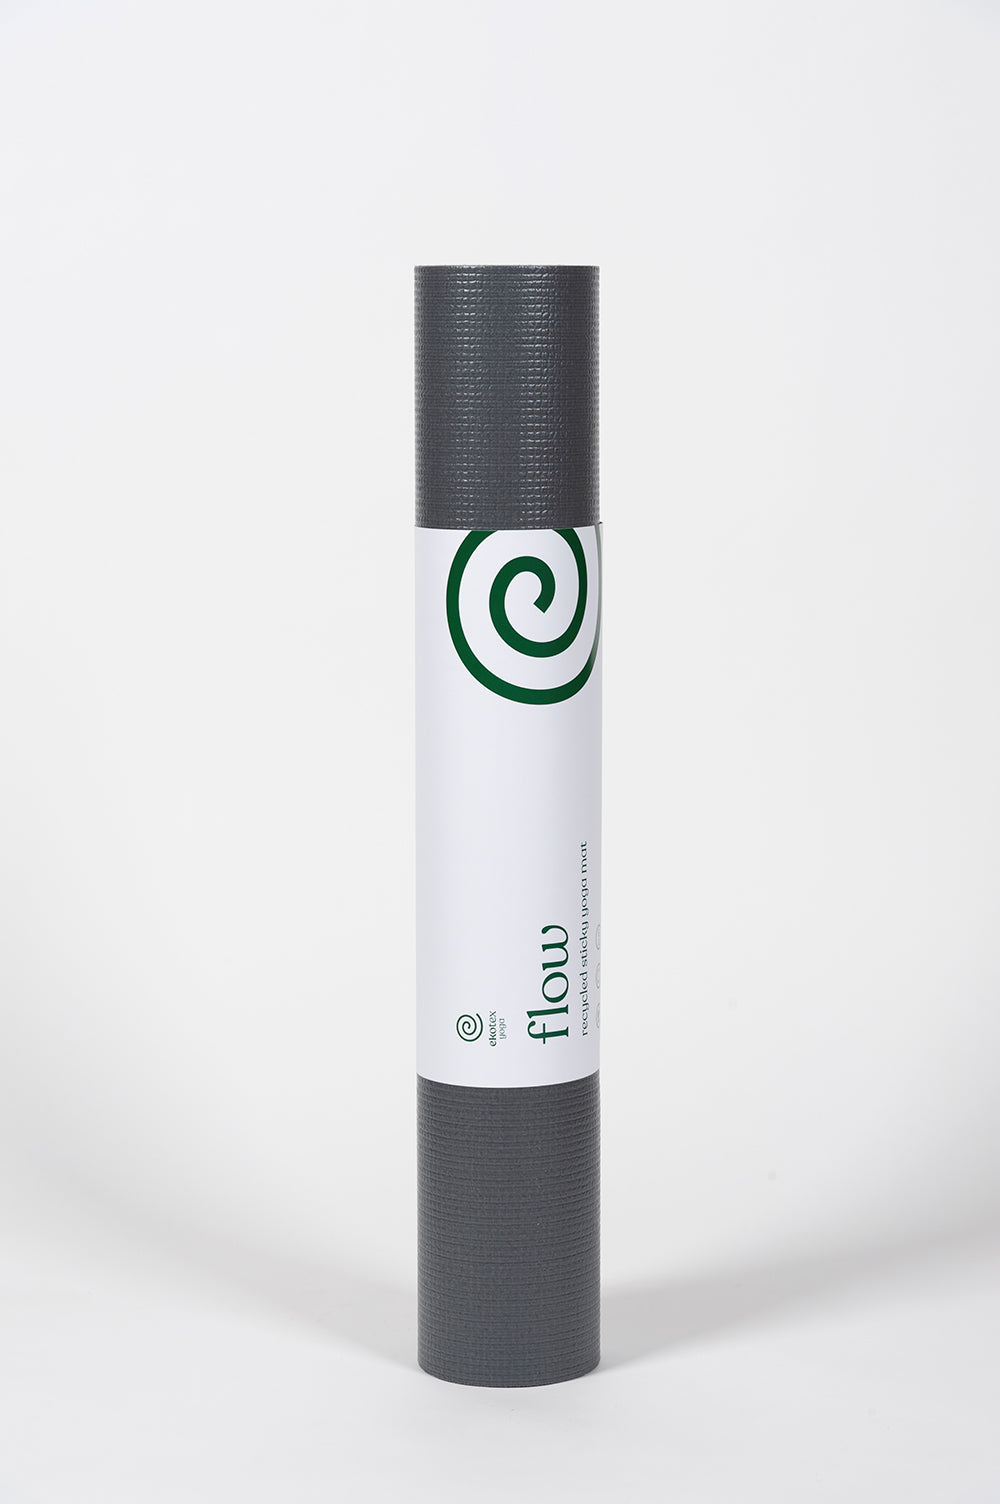 The Recycled Sticky Yoga Mat